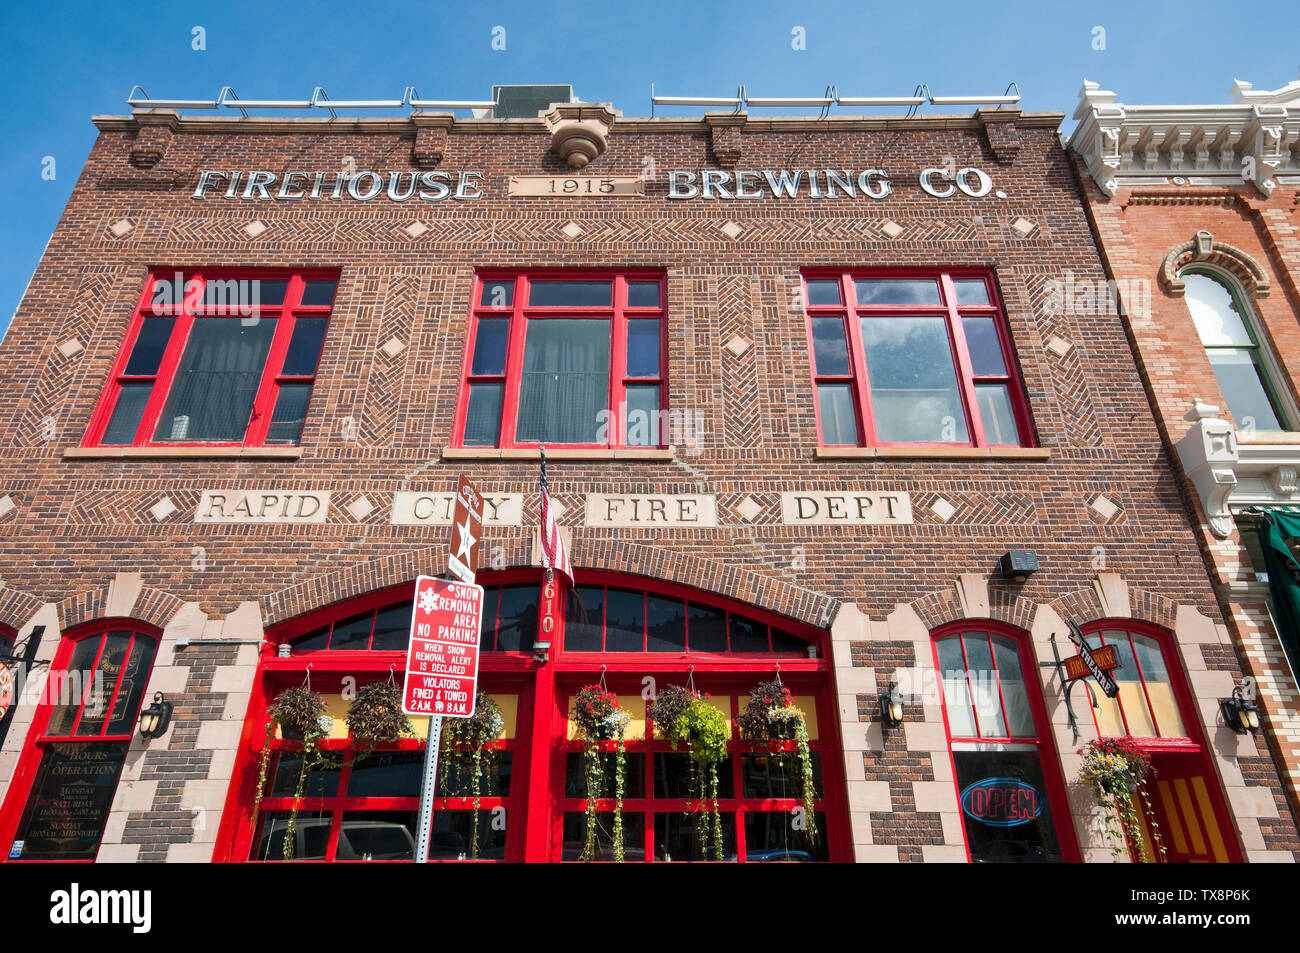 Firehouse Brewing Company bar and restaurant (in the historical site of Fire Dept) in Rapid City, County Pennington, South Dakota, USA Stock Photo